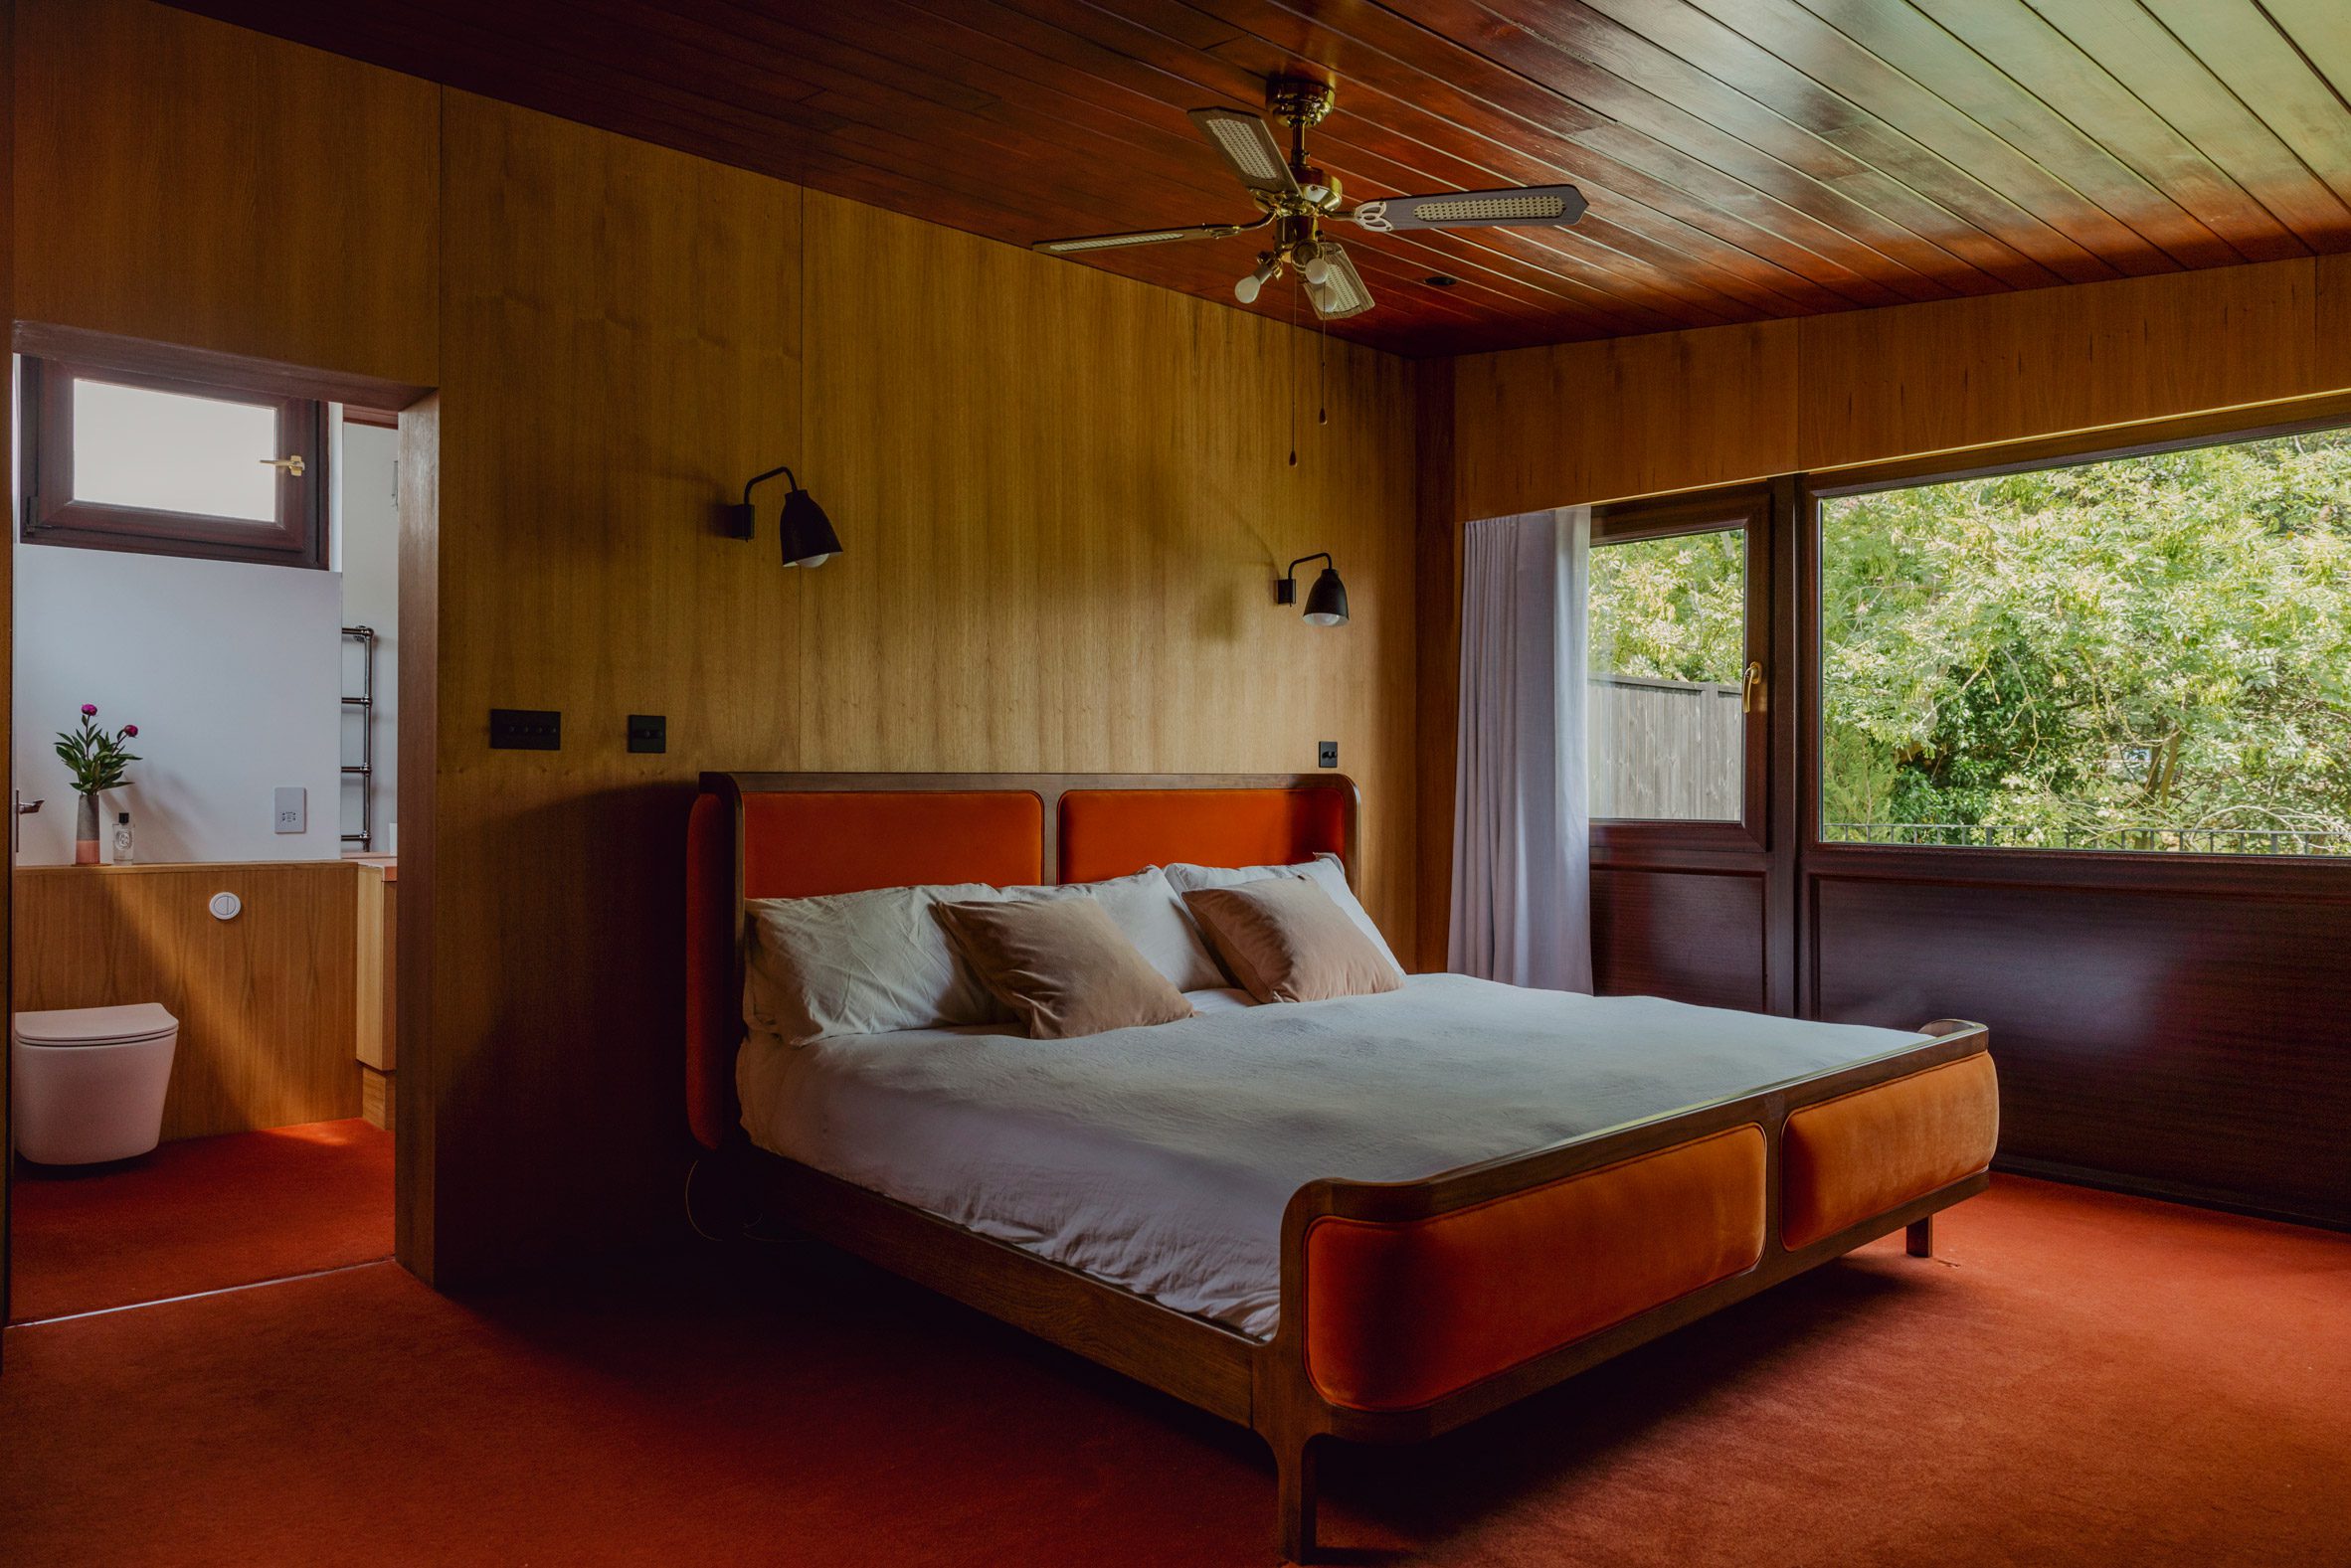 Bedroom in Zero House with wood-panelled walls and an orange carpet